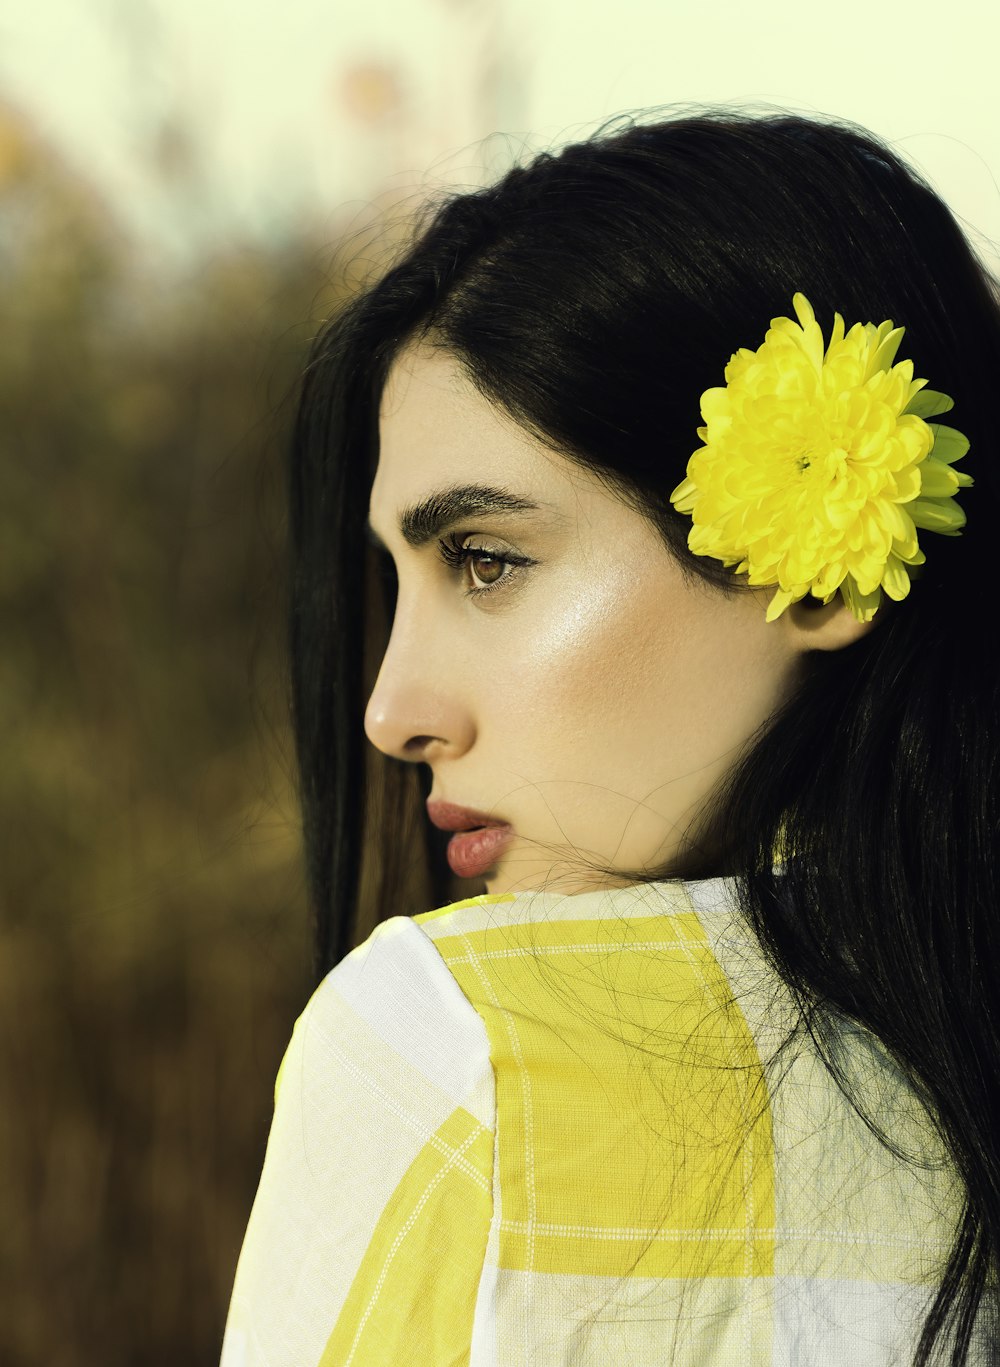 shallow focus photo of woman in white and yellow top